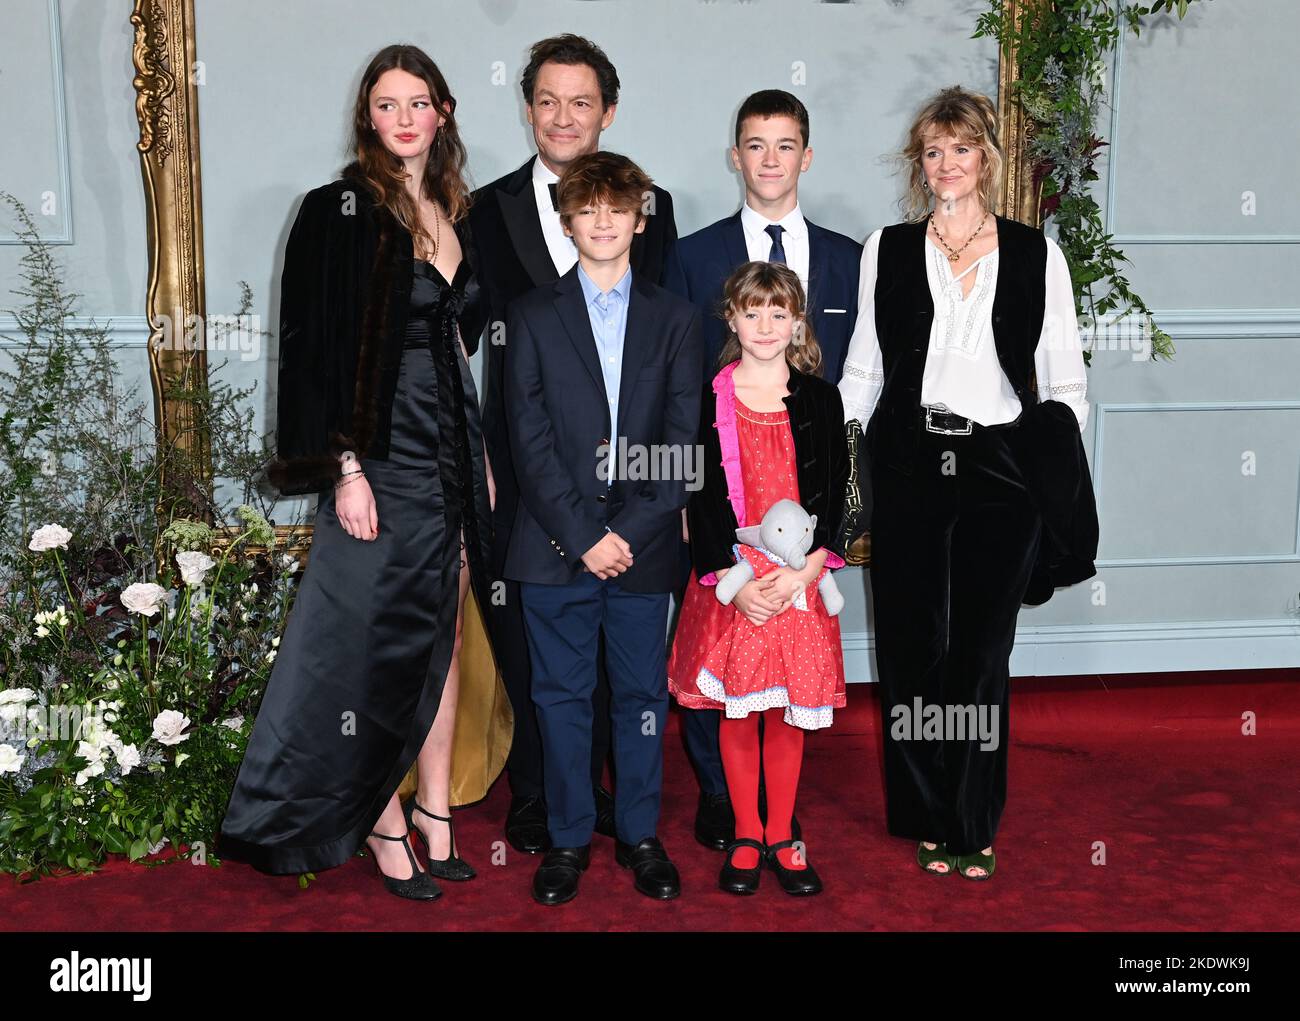 London, UK. 08th Nov, 2022. November 8th, 2022, London, UK. Dominic West and Catherine FitzGerald with their children Dora, Senan, Francis and Christabel arriving at the World Premiere of The Crown Season 5, Theatre Royal, Drury Lane, London. Credit: Doug Peters/Alamy Live News Stock Photo